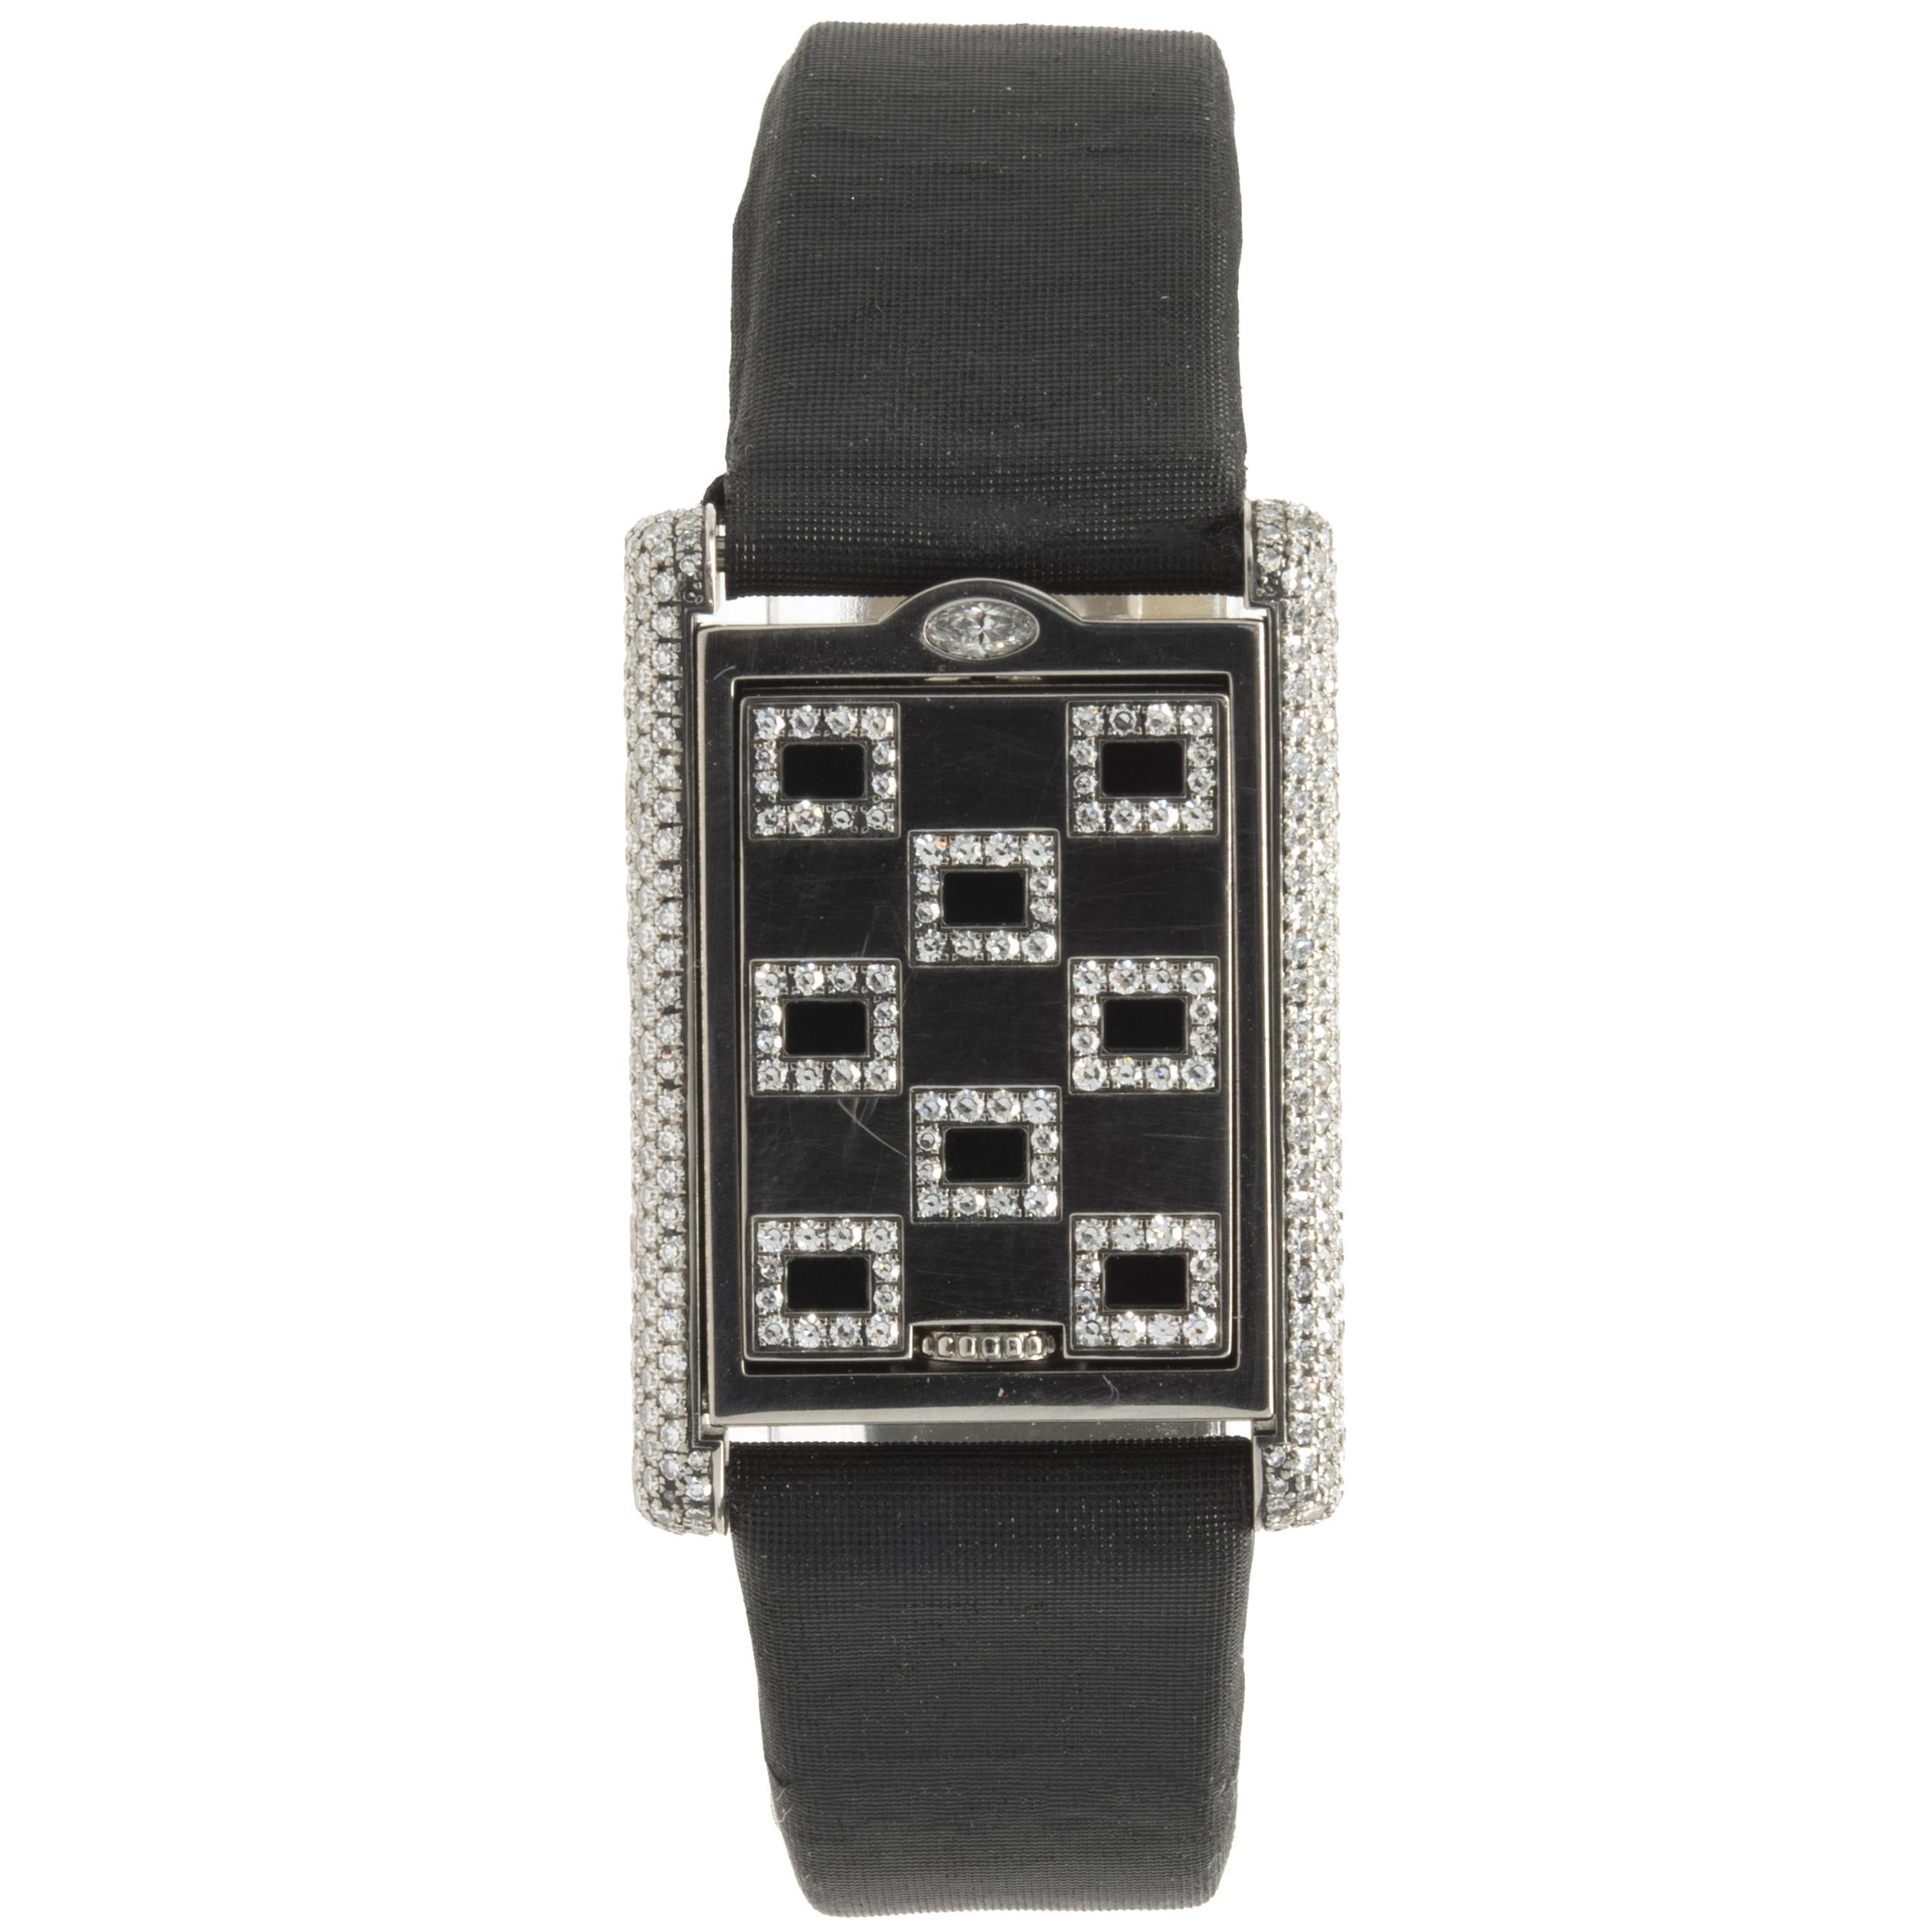 Movement: quartz
Function: hours, minutes, seconds, date
Case: 32.5 x 22.5mm 18K white gold rectangular case, factory diamond bezel, push pull crown, sapphire crystal
Dial: white roman dial, steel sword sweeping hands
Band: Cartier black leather